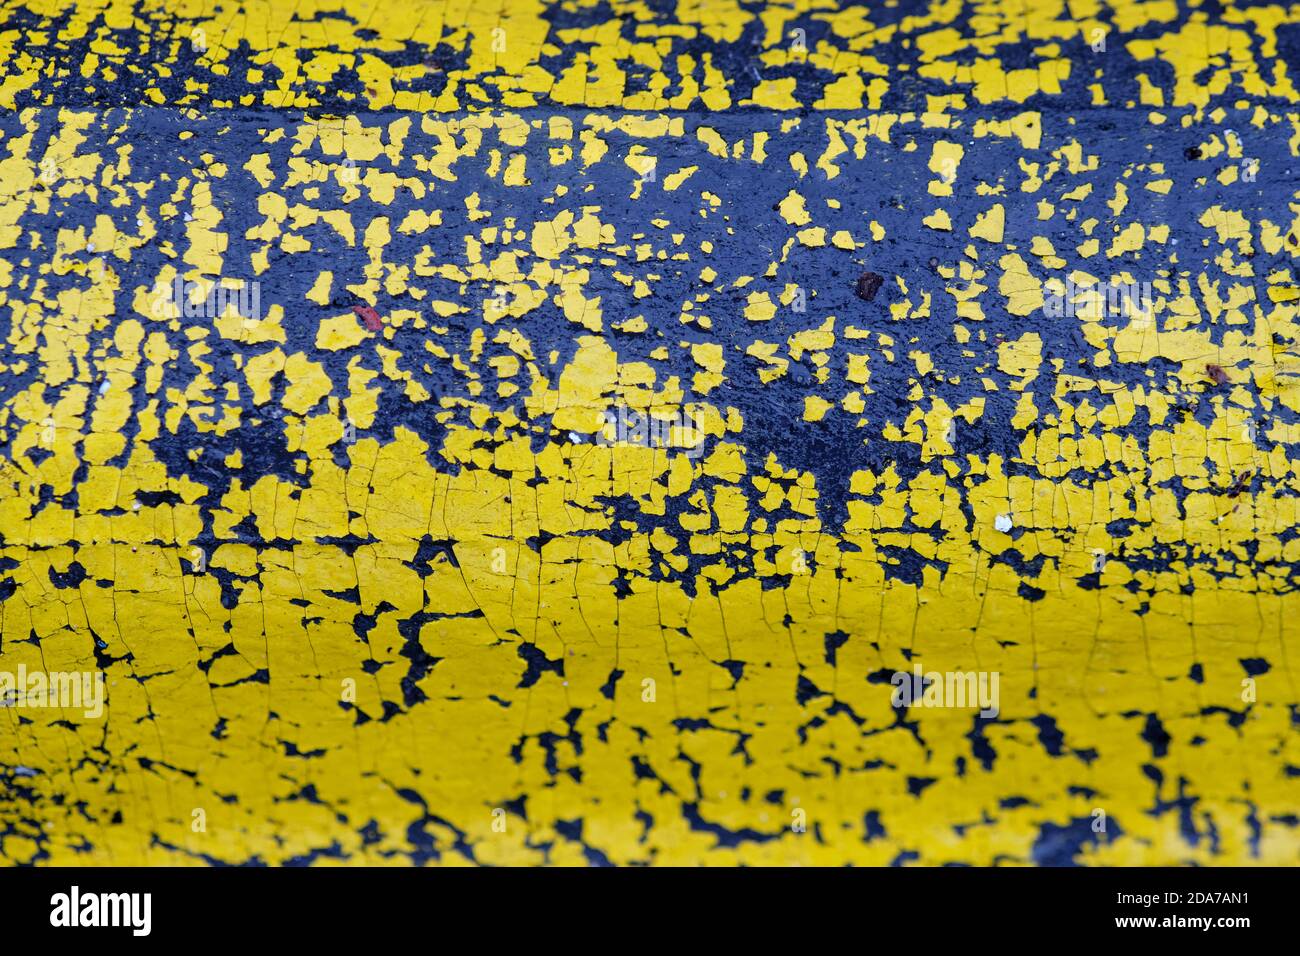 Background with close-up of yellow paint flaking off a black wet plastic part of a road boundary. Seen in Germany in October. Stock Photo